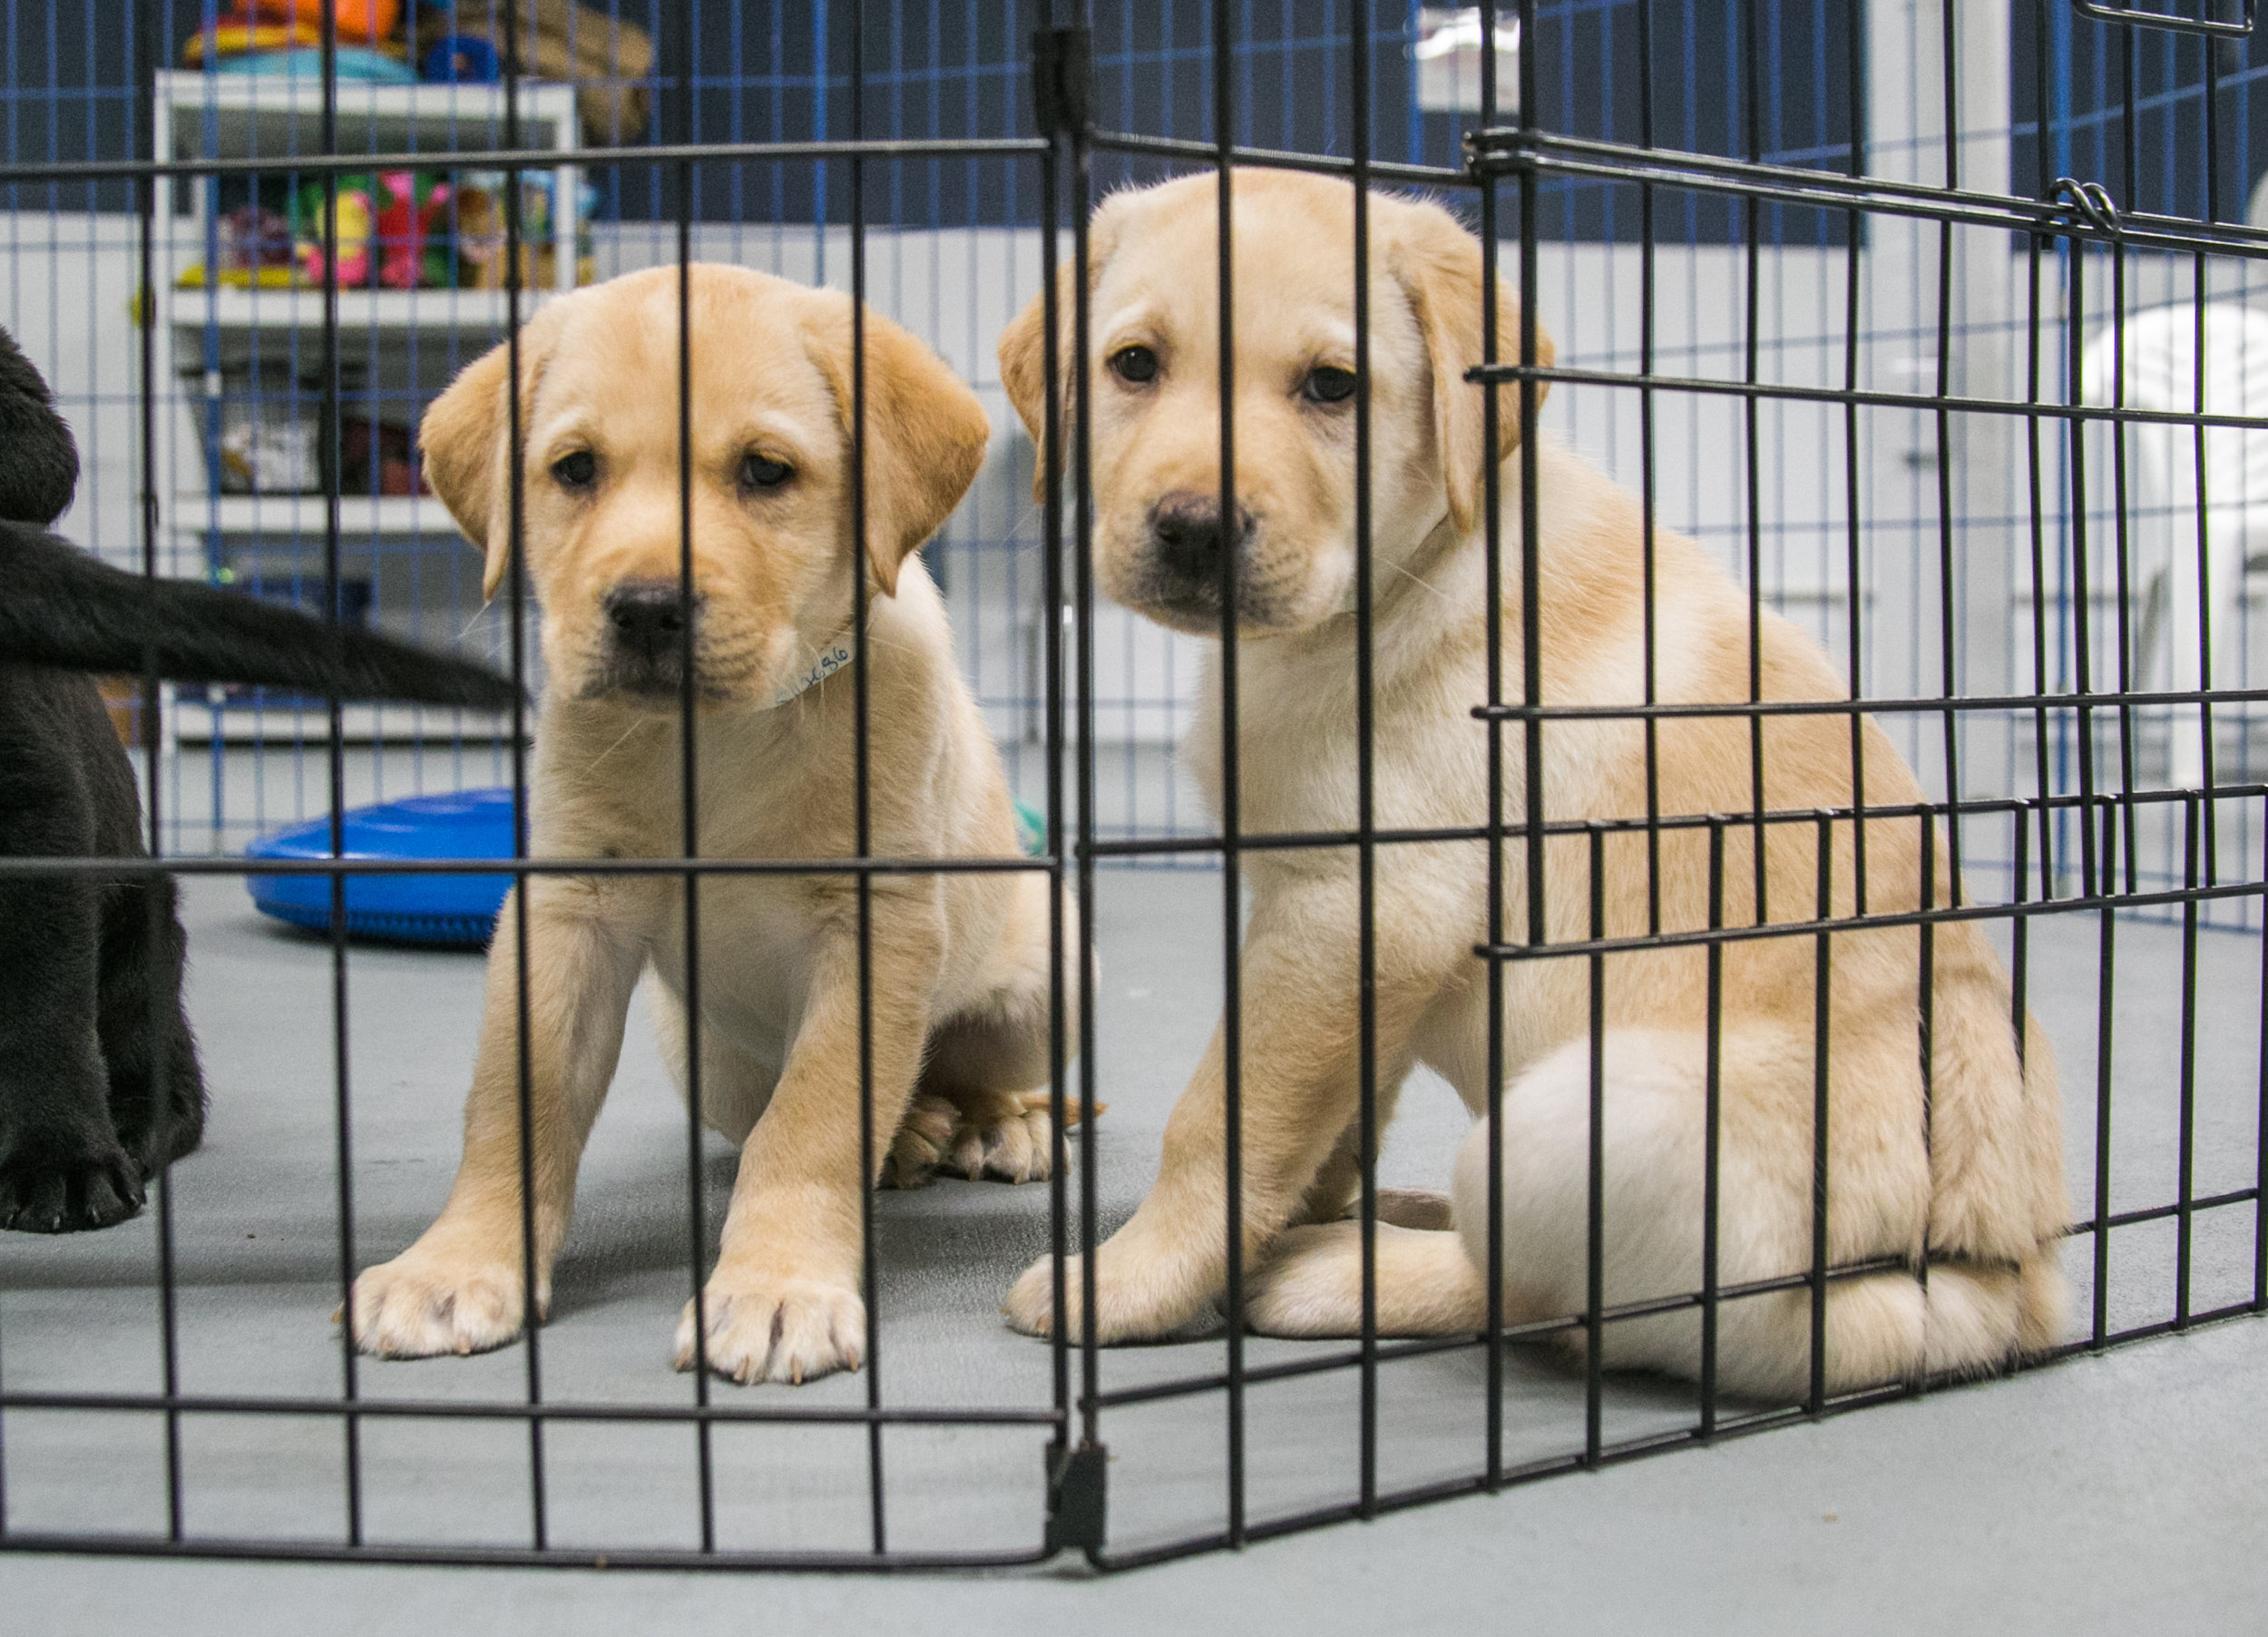  6-week old puppies being cared for at the Canine Partners for Life Headquarters in Cochranville, PA. The dogs will stay here for another 2-3 weeks before being transferred to a prison in Pennsylvania or Maryland. 